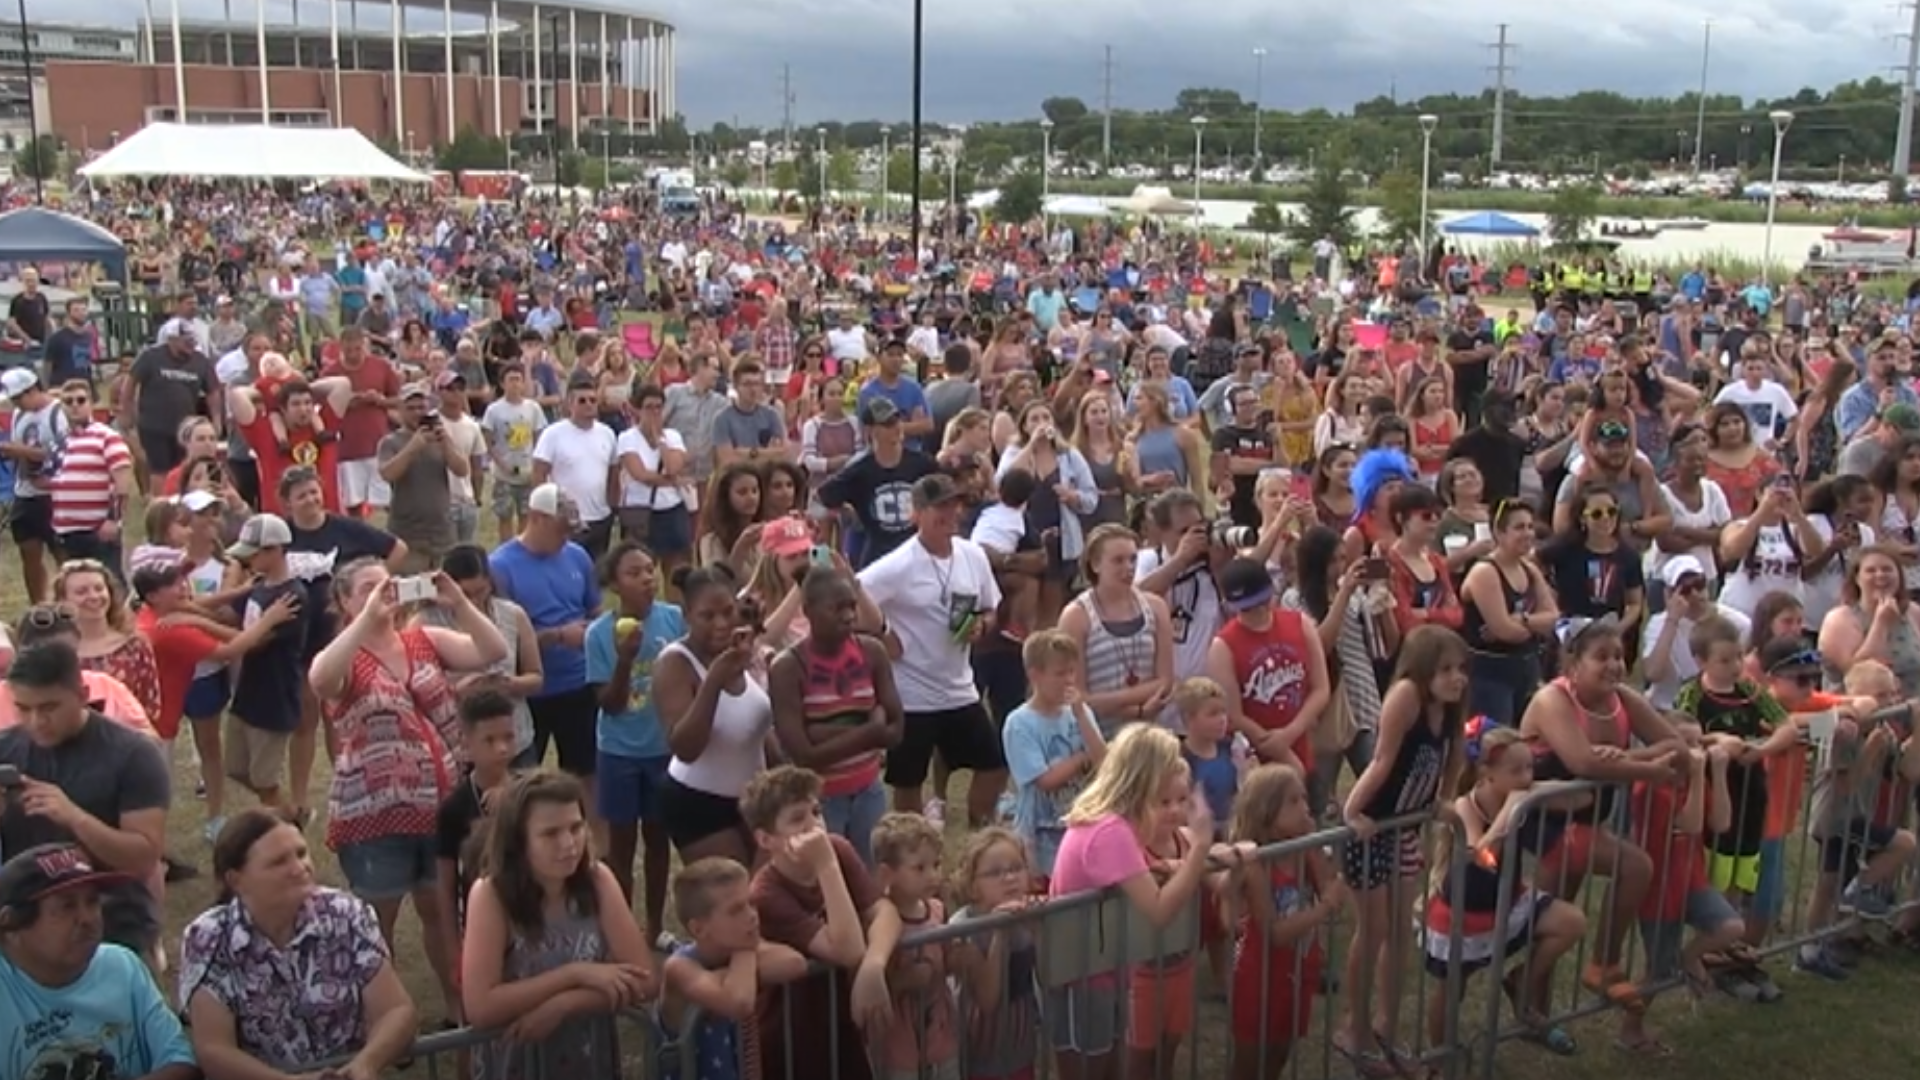 The City of Waco canceled the 2020 Brazos Nights concert series and annual Fourth on the Brazos celebration Wednesday.